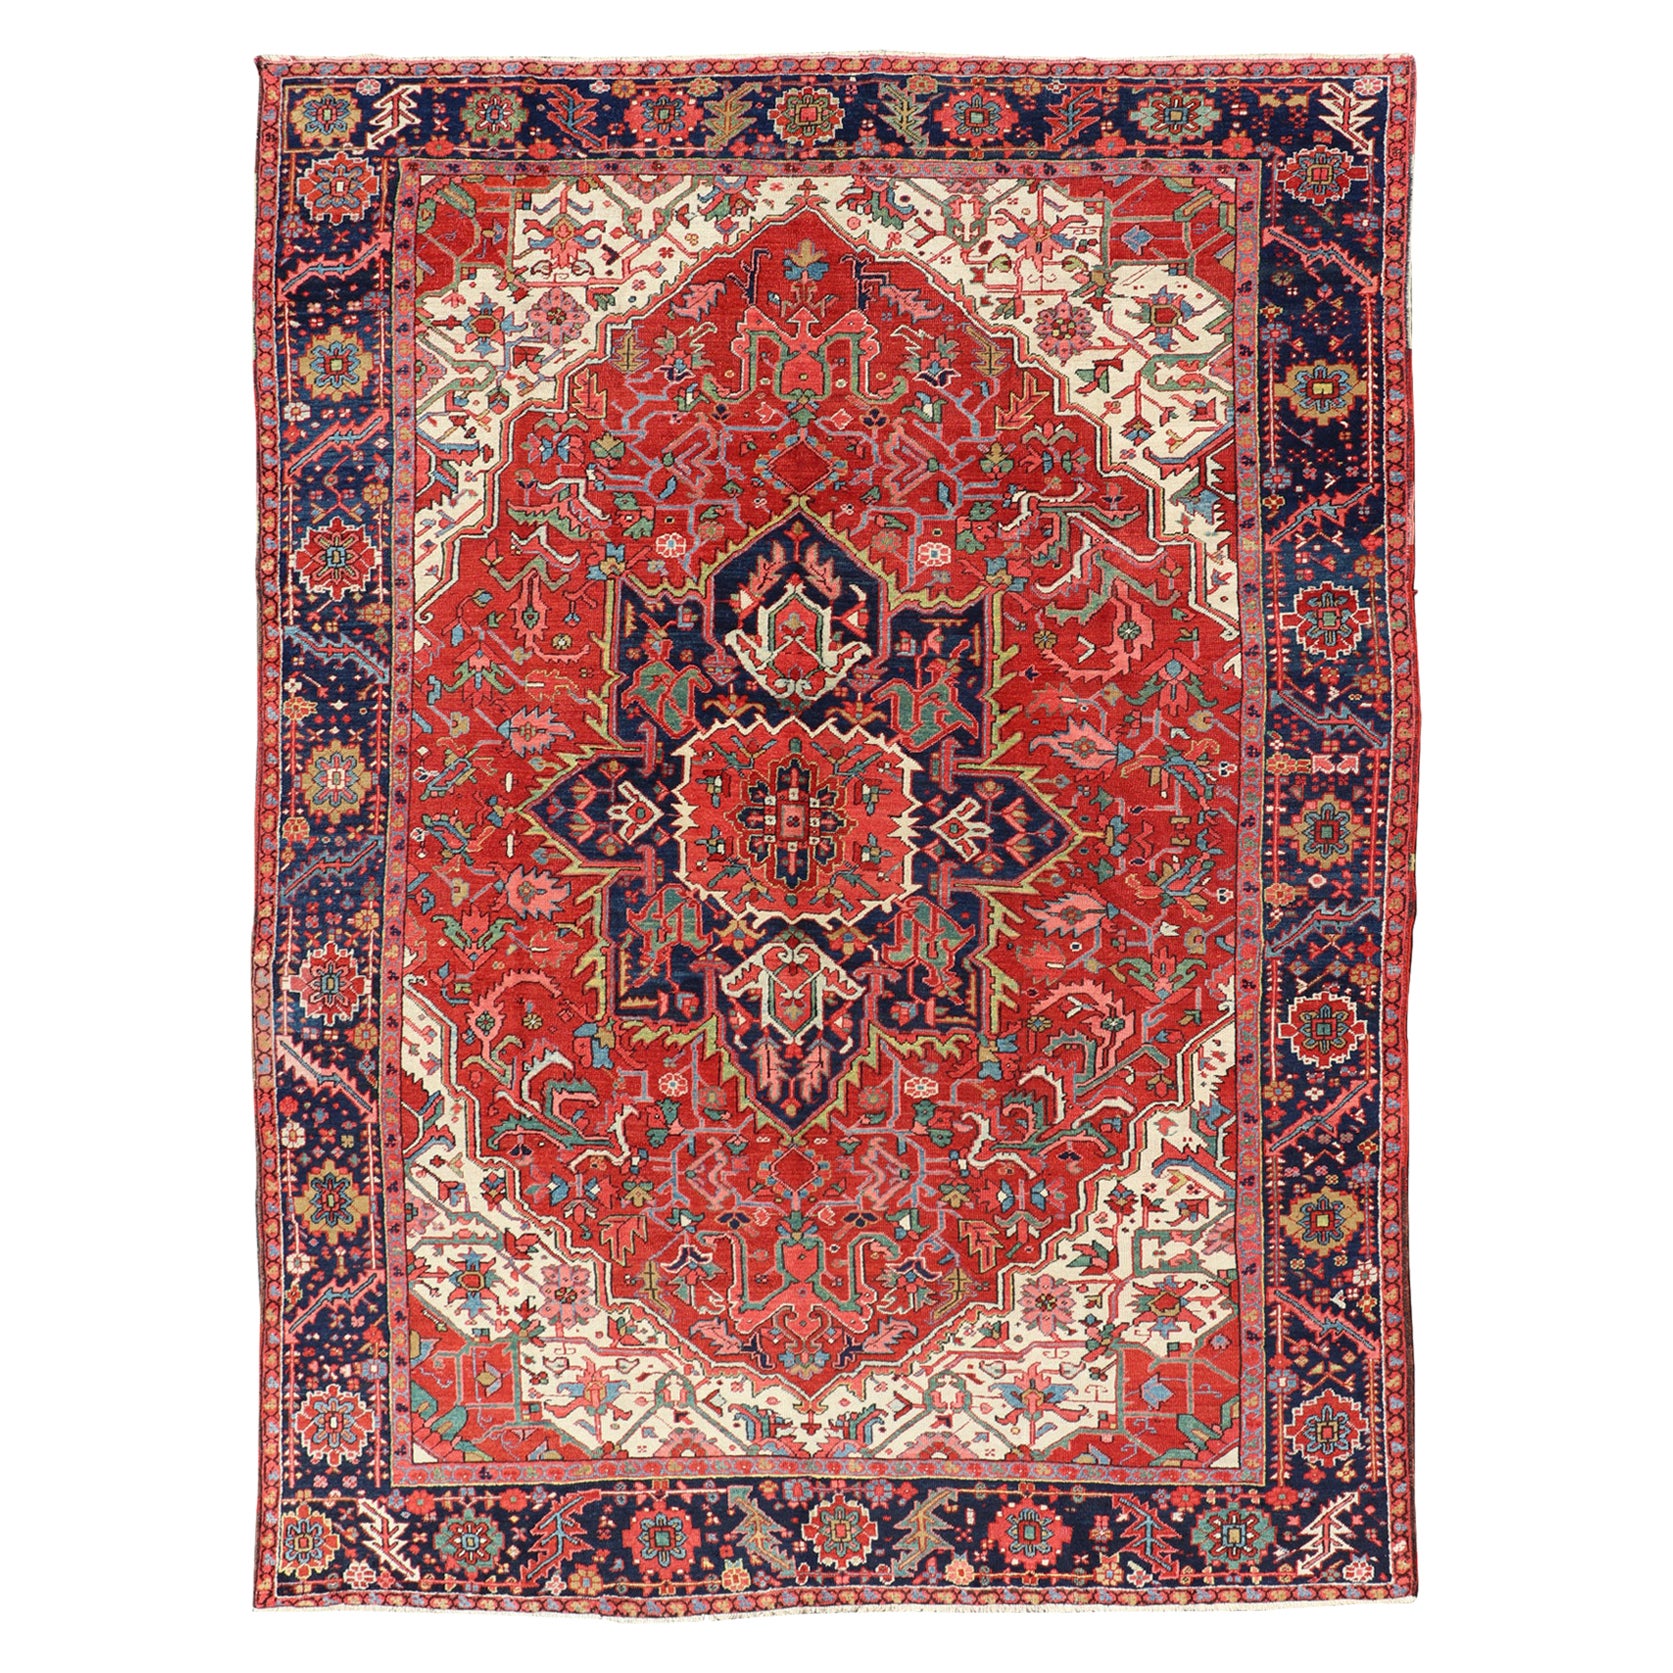 Antique Heriz Carpet with Stylized Central Medallion Set on Tomato Red Field